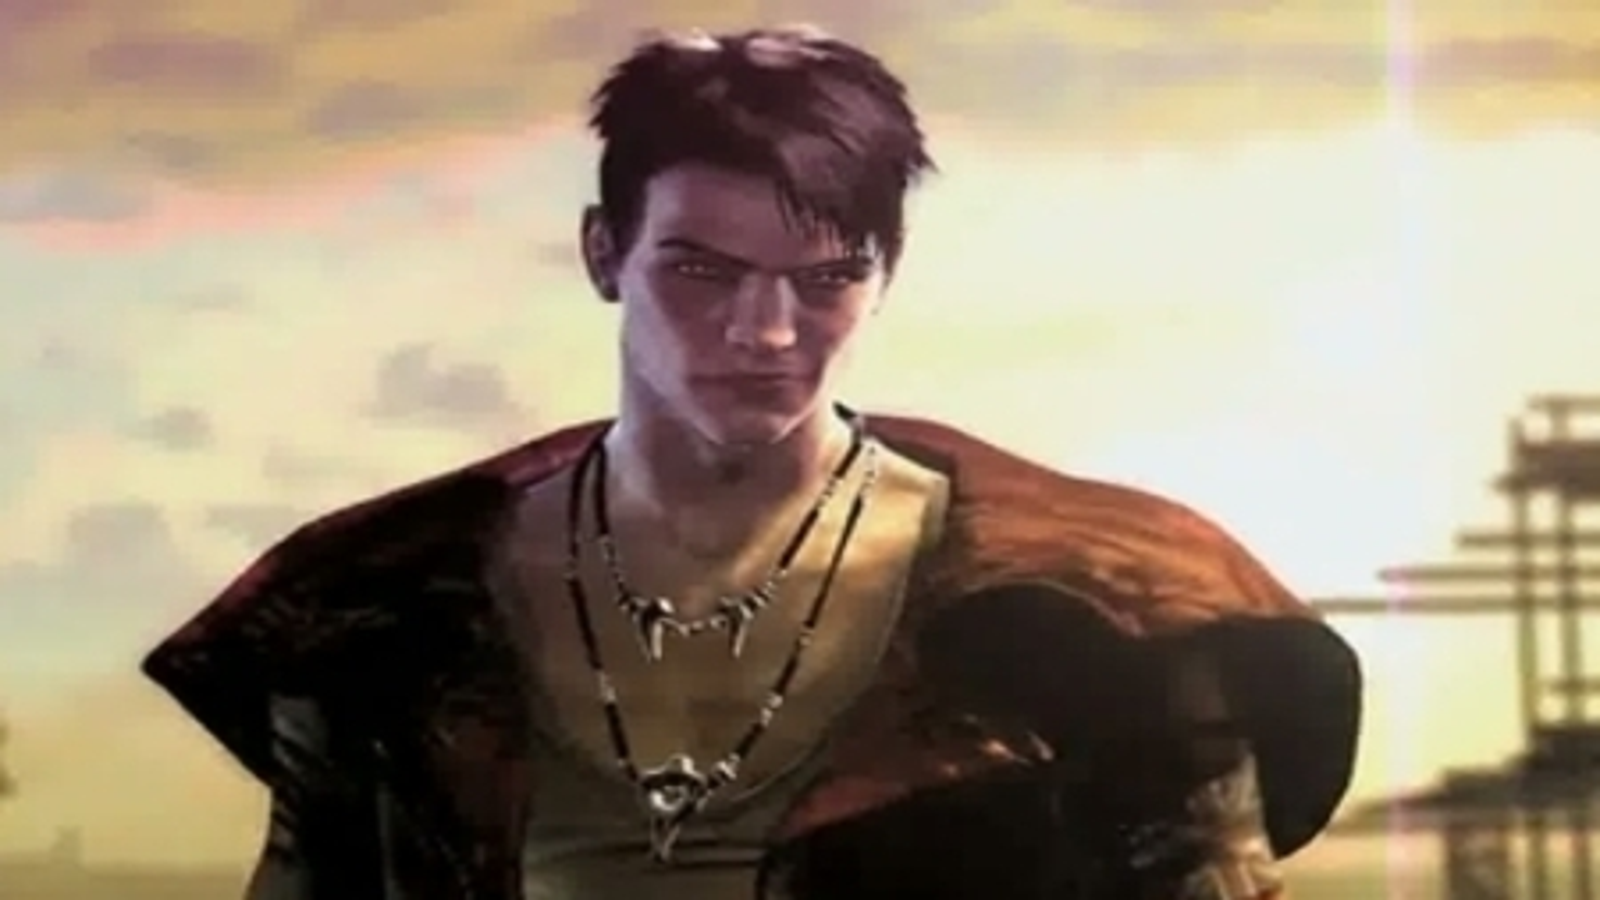 Who to play Dante in a Devil May Cry live action? Opinions? : r